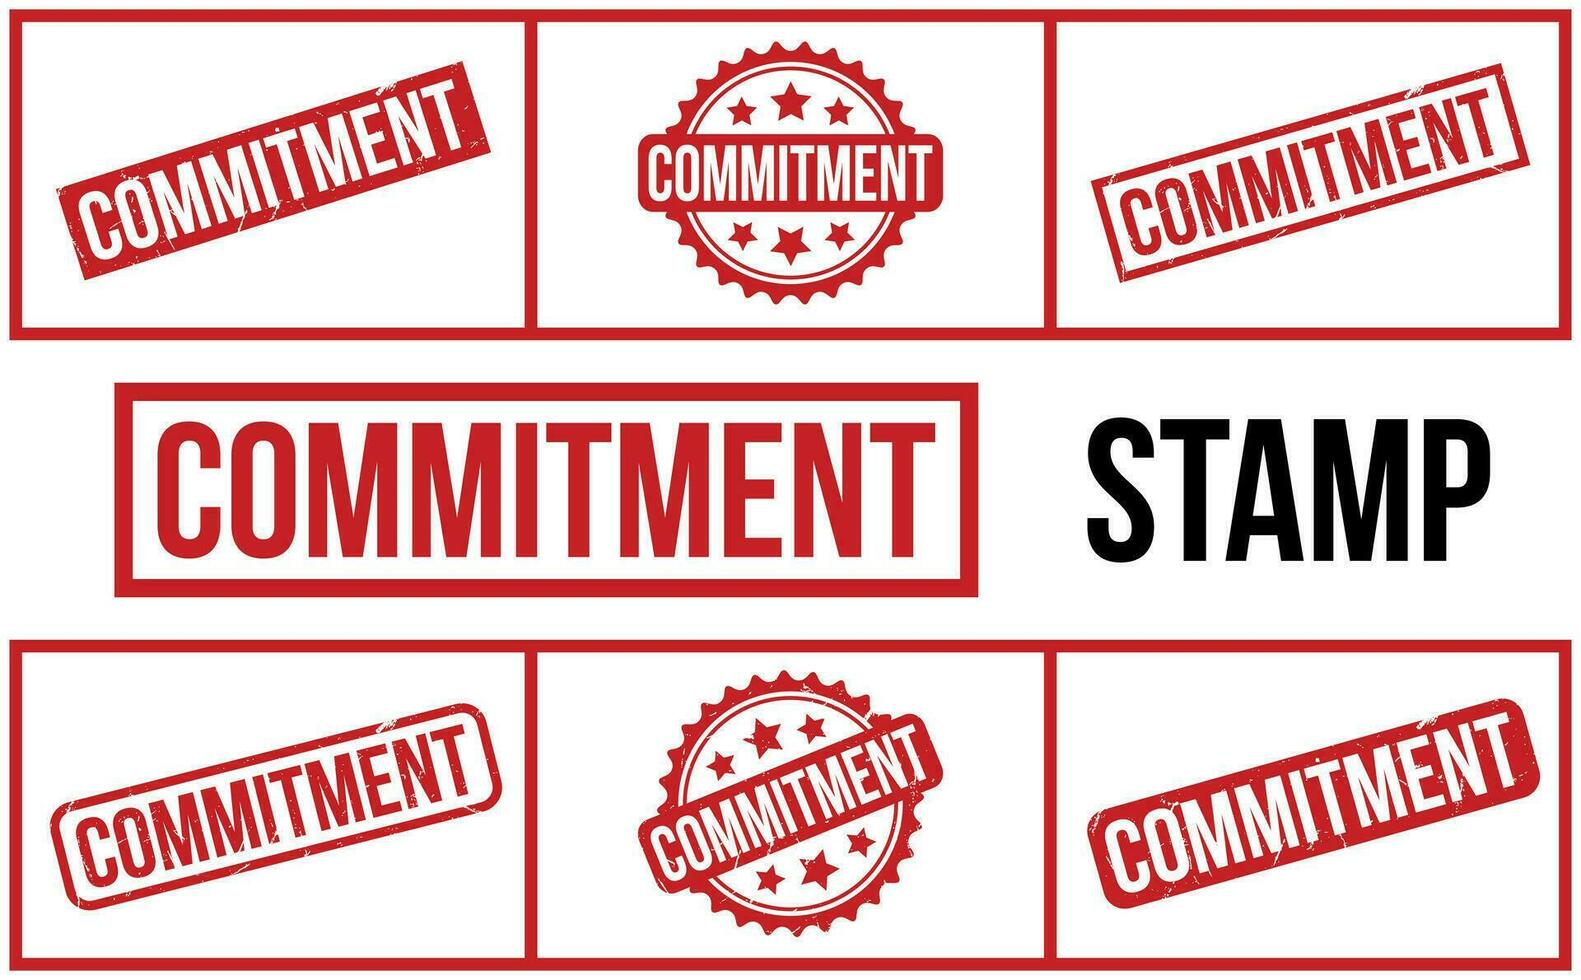 Commitment rubber grunge stamp set vector